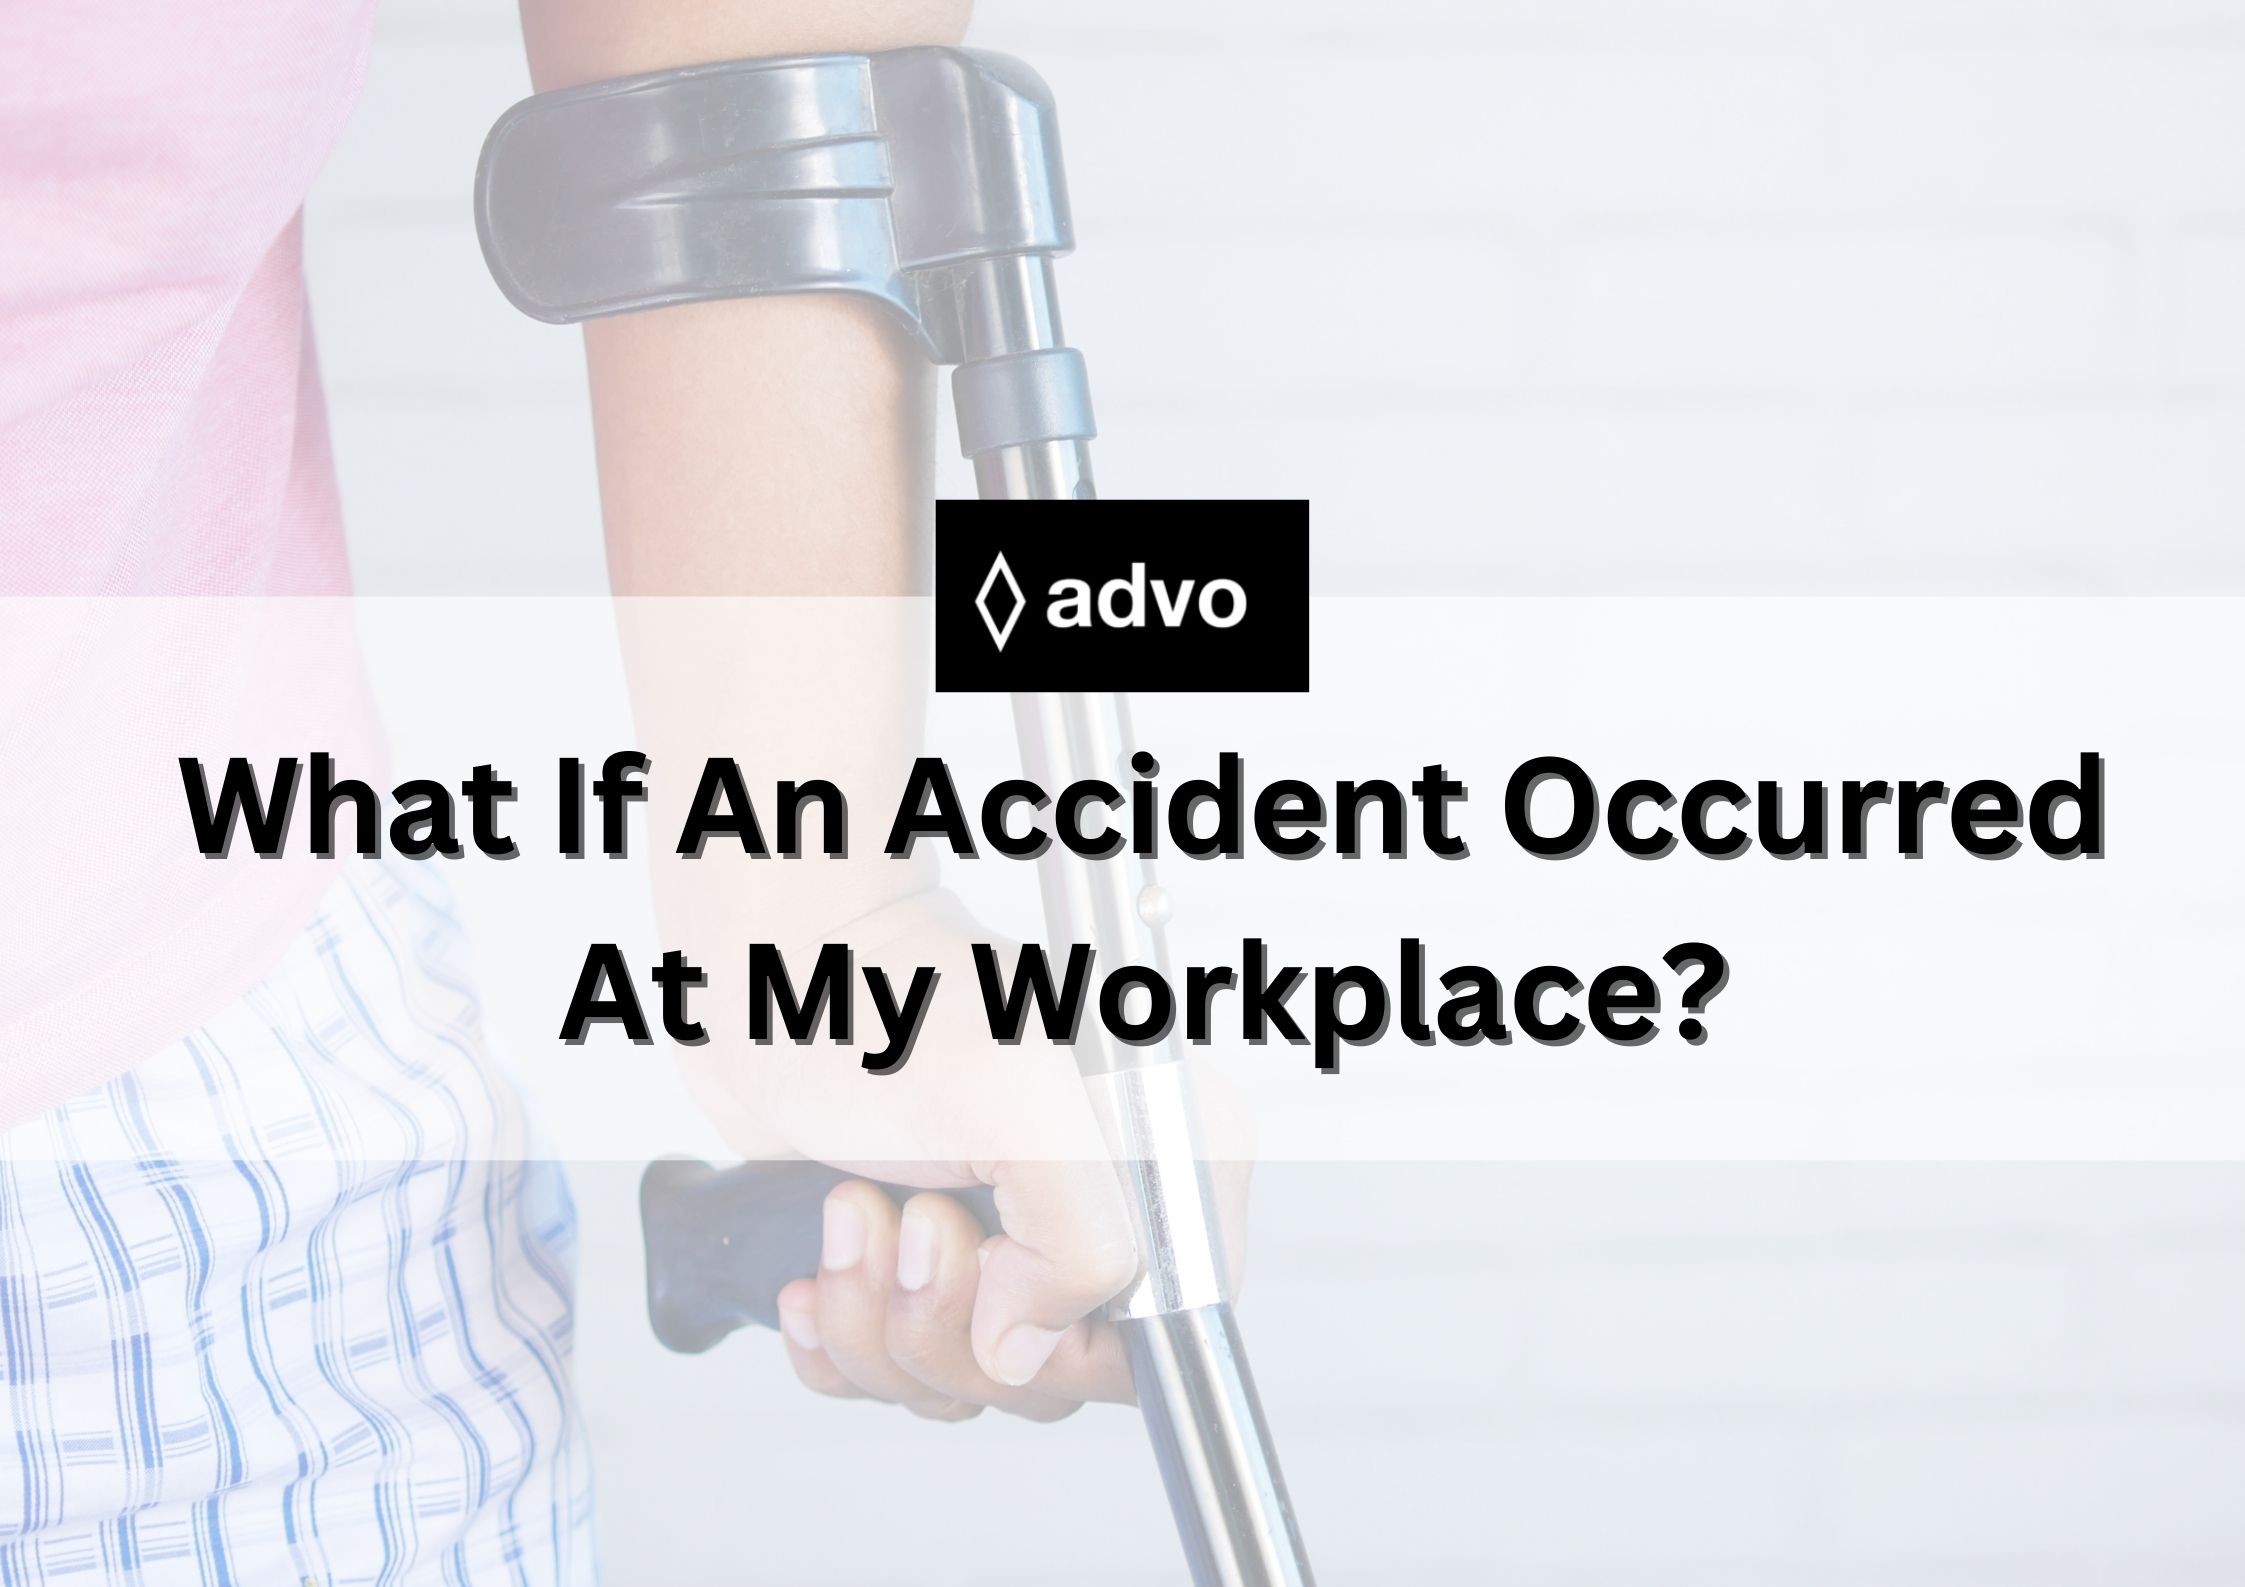 Personal injury lawyers for workplace accidents in Los Angeles